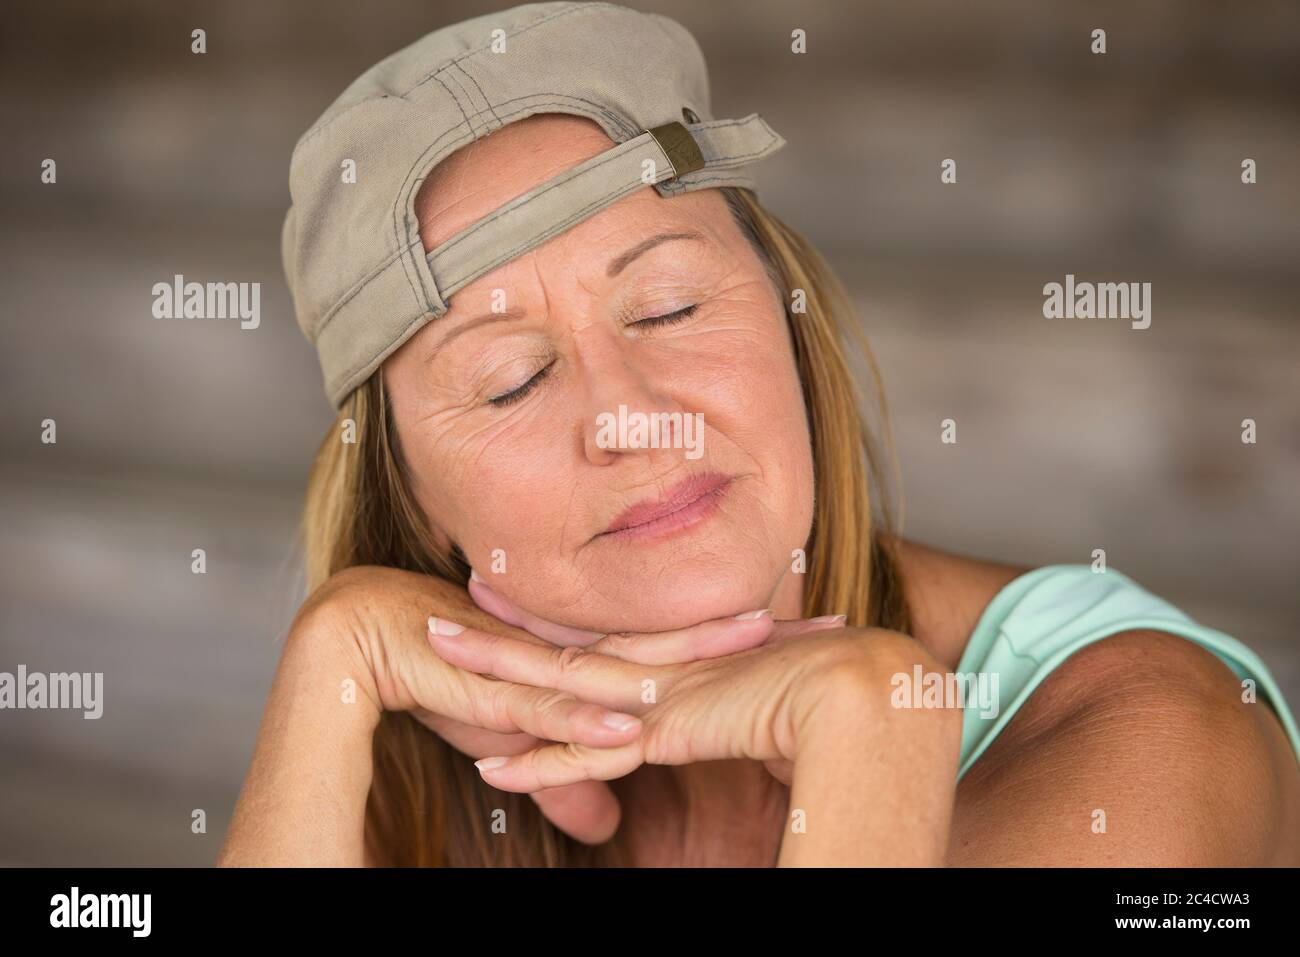 Portrait attractive fit active mature woman wearing green sporty top and cap, happy sleepy relaxed, chin resting on hands, closed eyes, blurred backgr Stock Photo